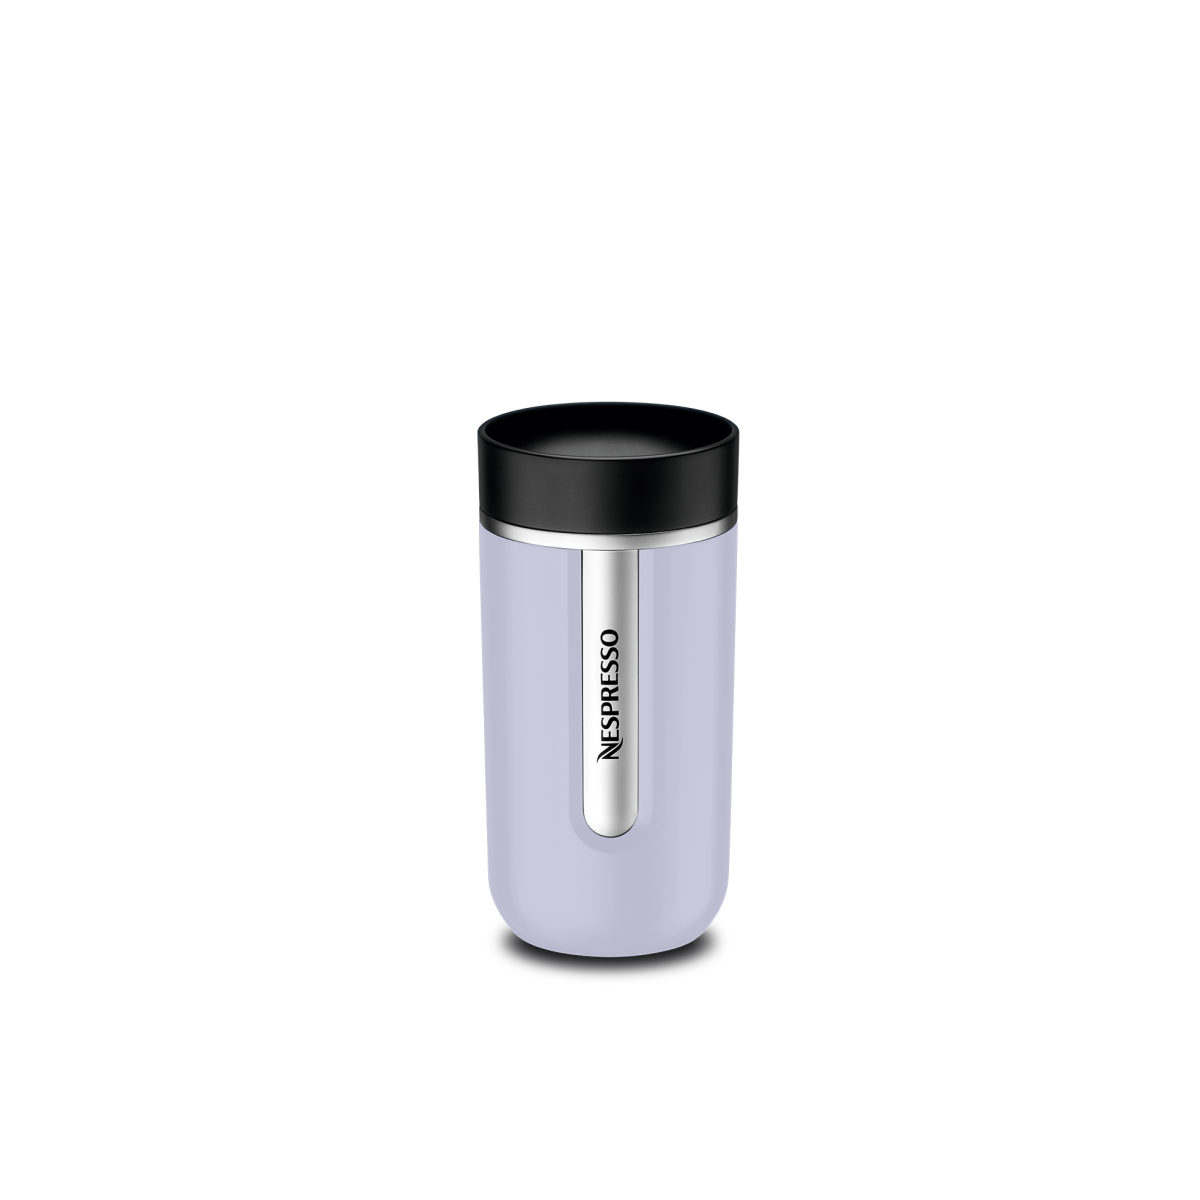 https://www.nespresso.com/shared_res/agility/global/accessories/collection/sku-main-info-product/nomad-travel-mug-lavender_2x.png